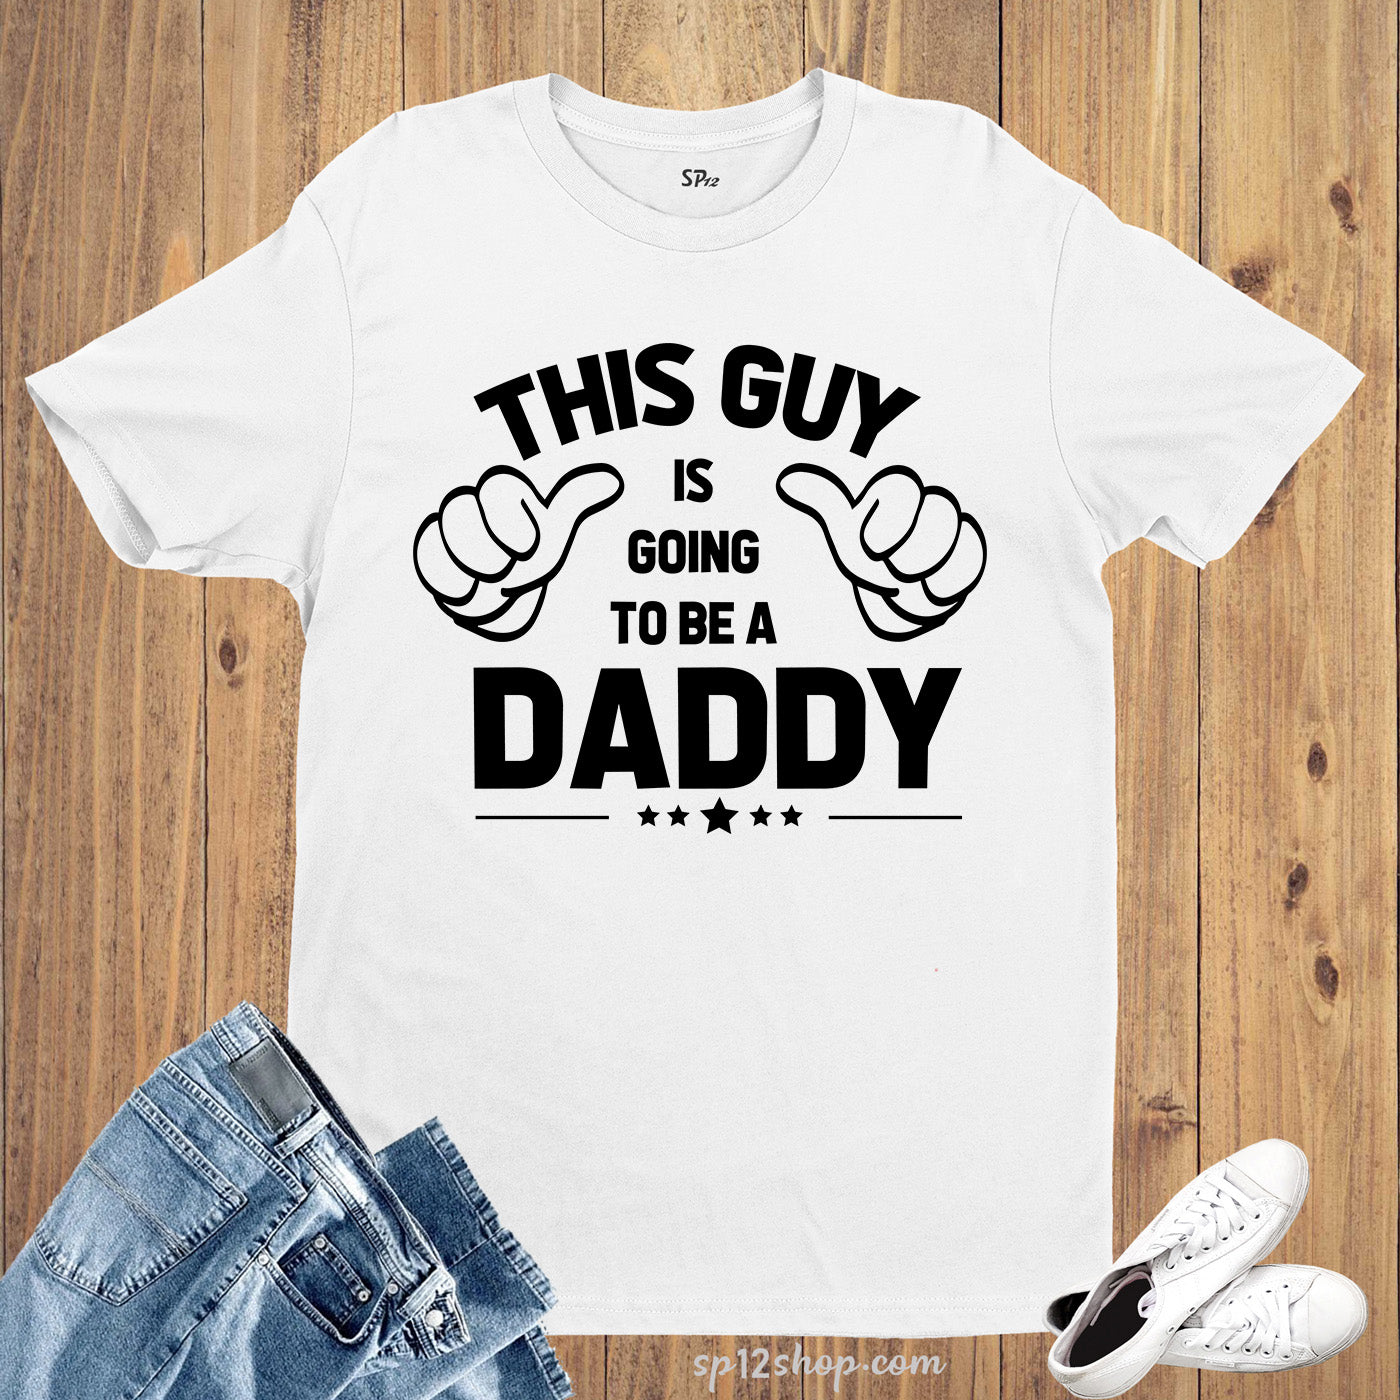 This Guy Is Going To Be a Daddy T Shirt